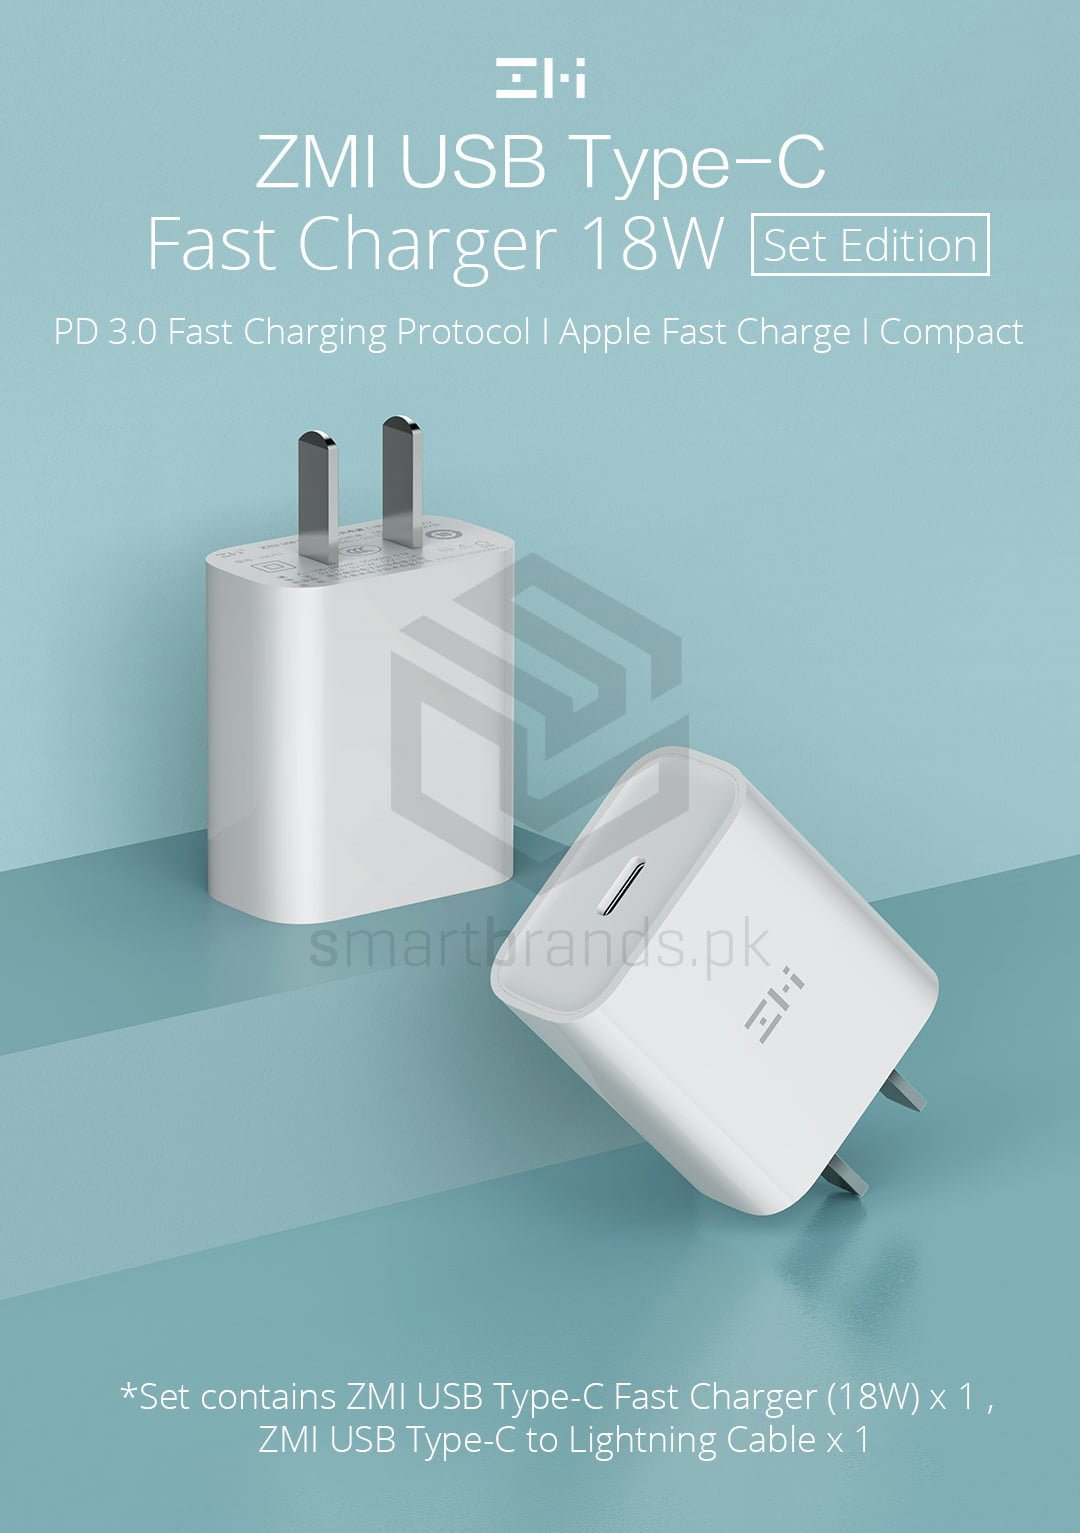 zmi usb type-c Charger 18W. set edition. PD 3.0 Fast Charging Protocol. Apple Fast Charge. Compact. *Set contains ZMI USB Type-C Fast Charger (18W) x 1 , ZMI USB Type-C to Lightning Cable x 1